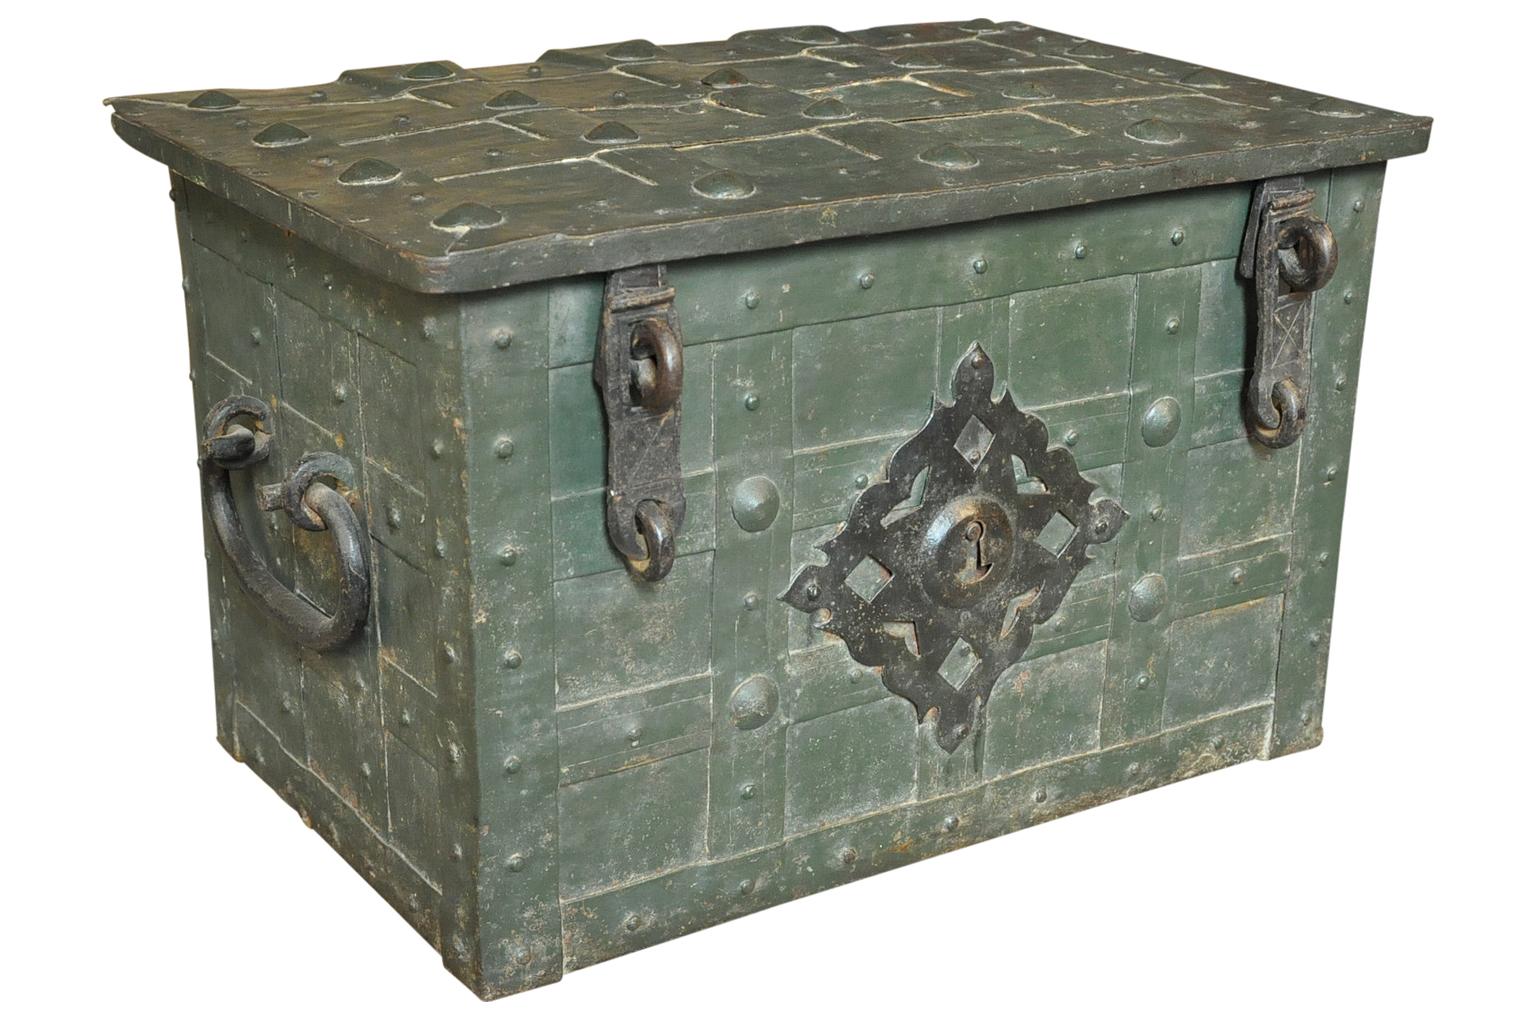 A very handsome 18th century strong box, safe trunk, expertly crafted from painted iron with a fascinating hidden locking mechanism. Wonderful as a coffee table or cocktail table as well.